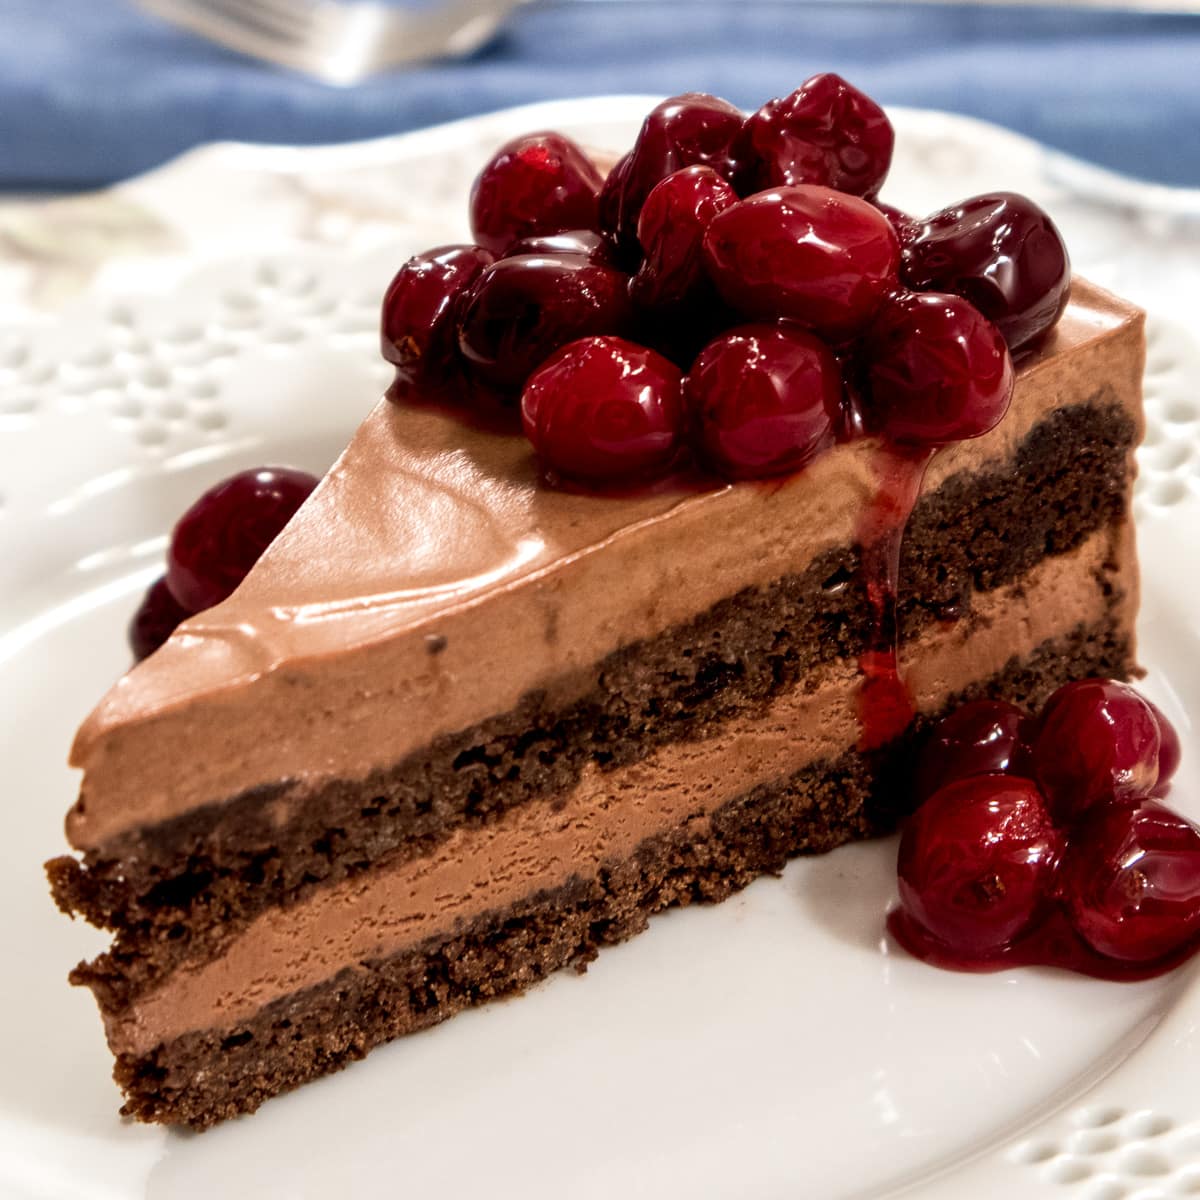 This Riene de Saba cake features 2 layers of chocolate cake with a mousse like filling, topped with candied cranberries